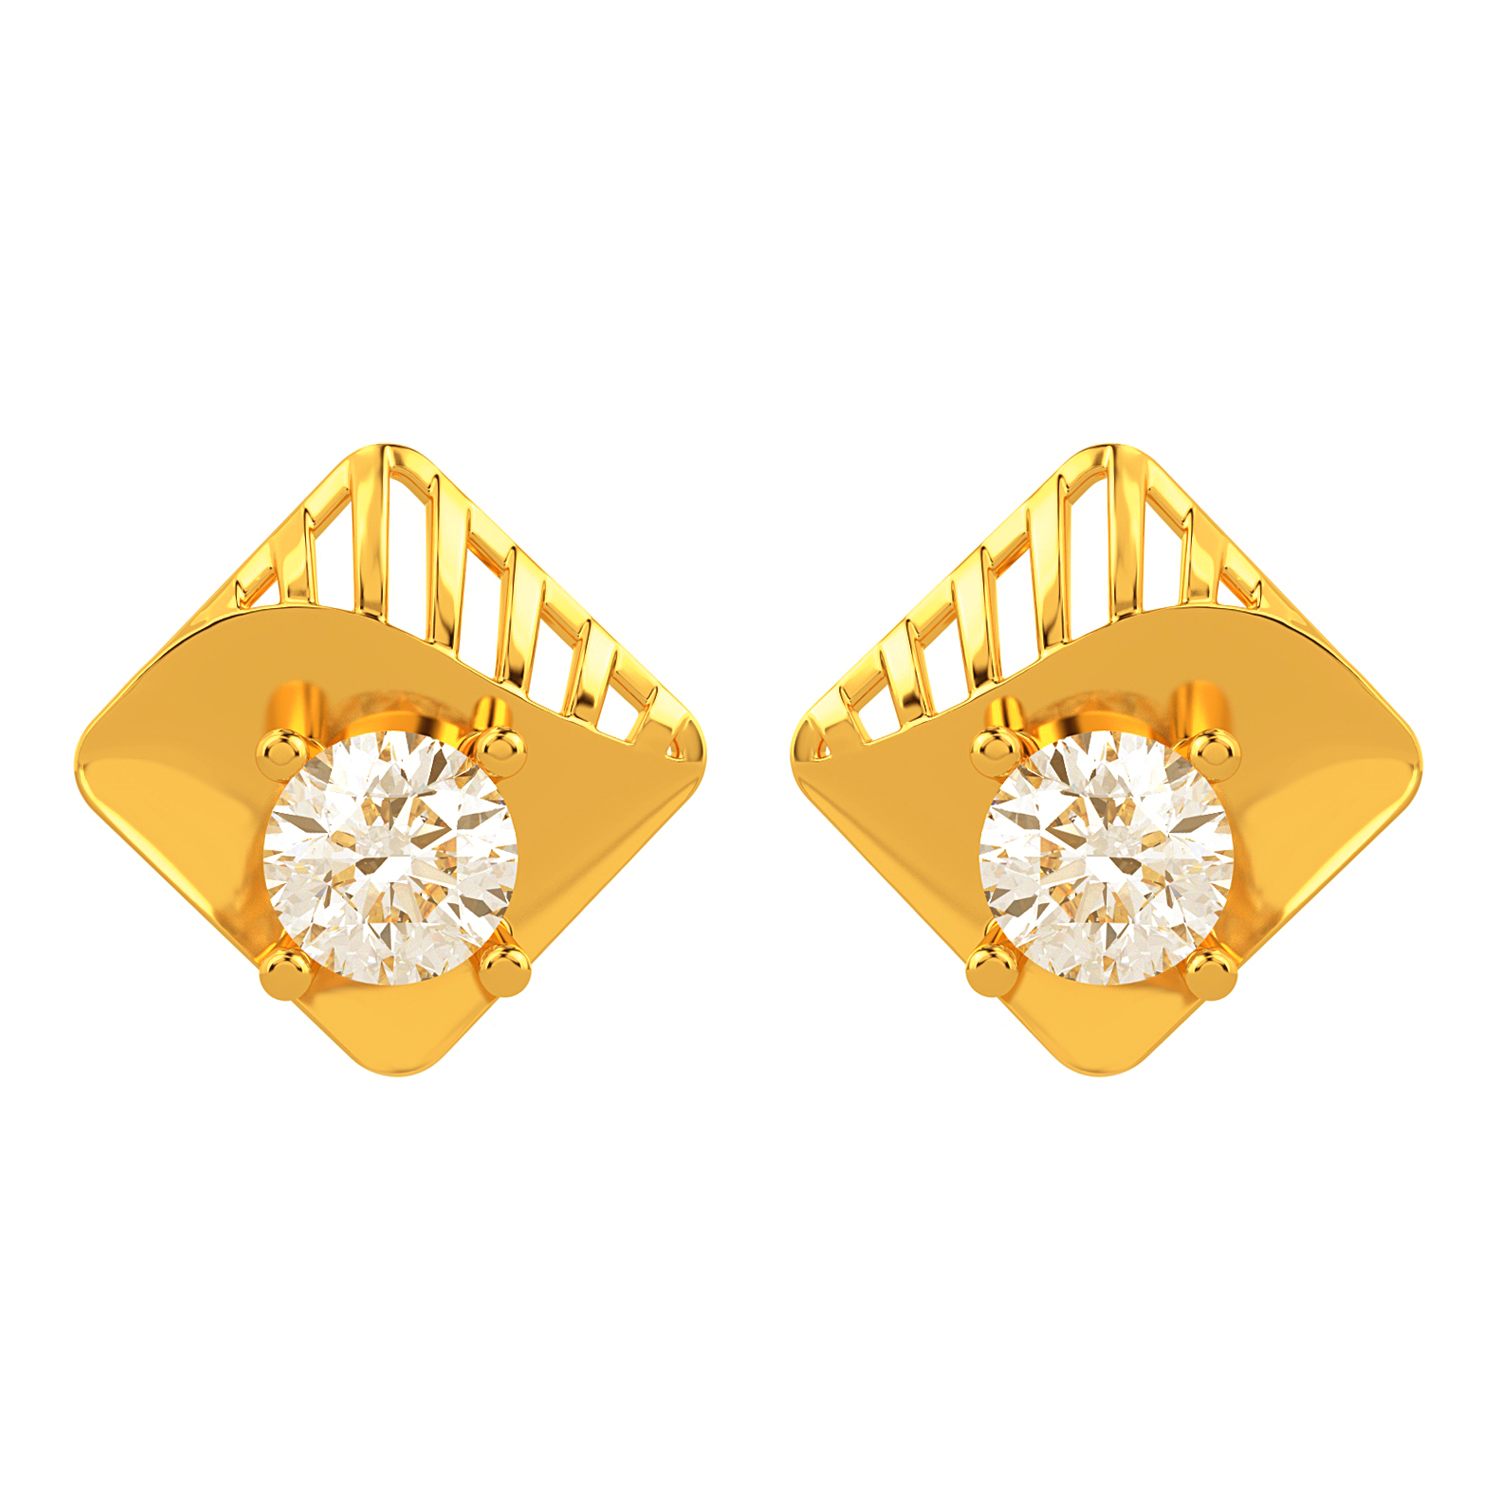 Accessorize with Diamond Earrings